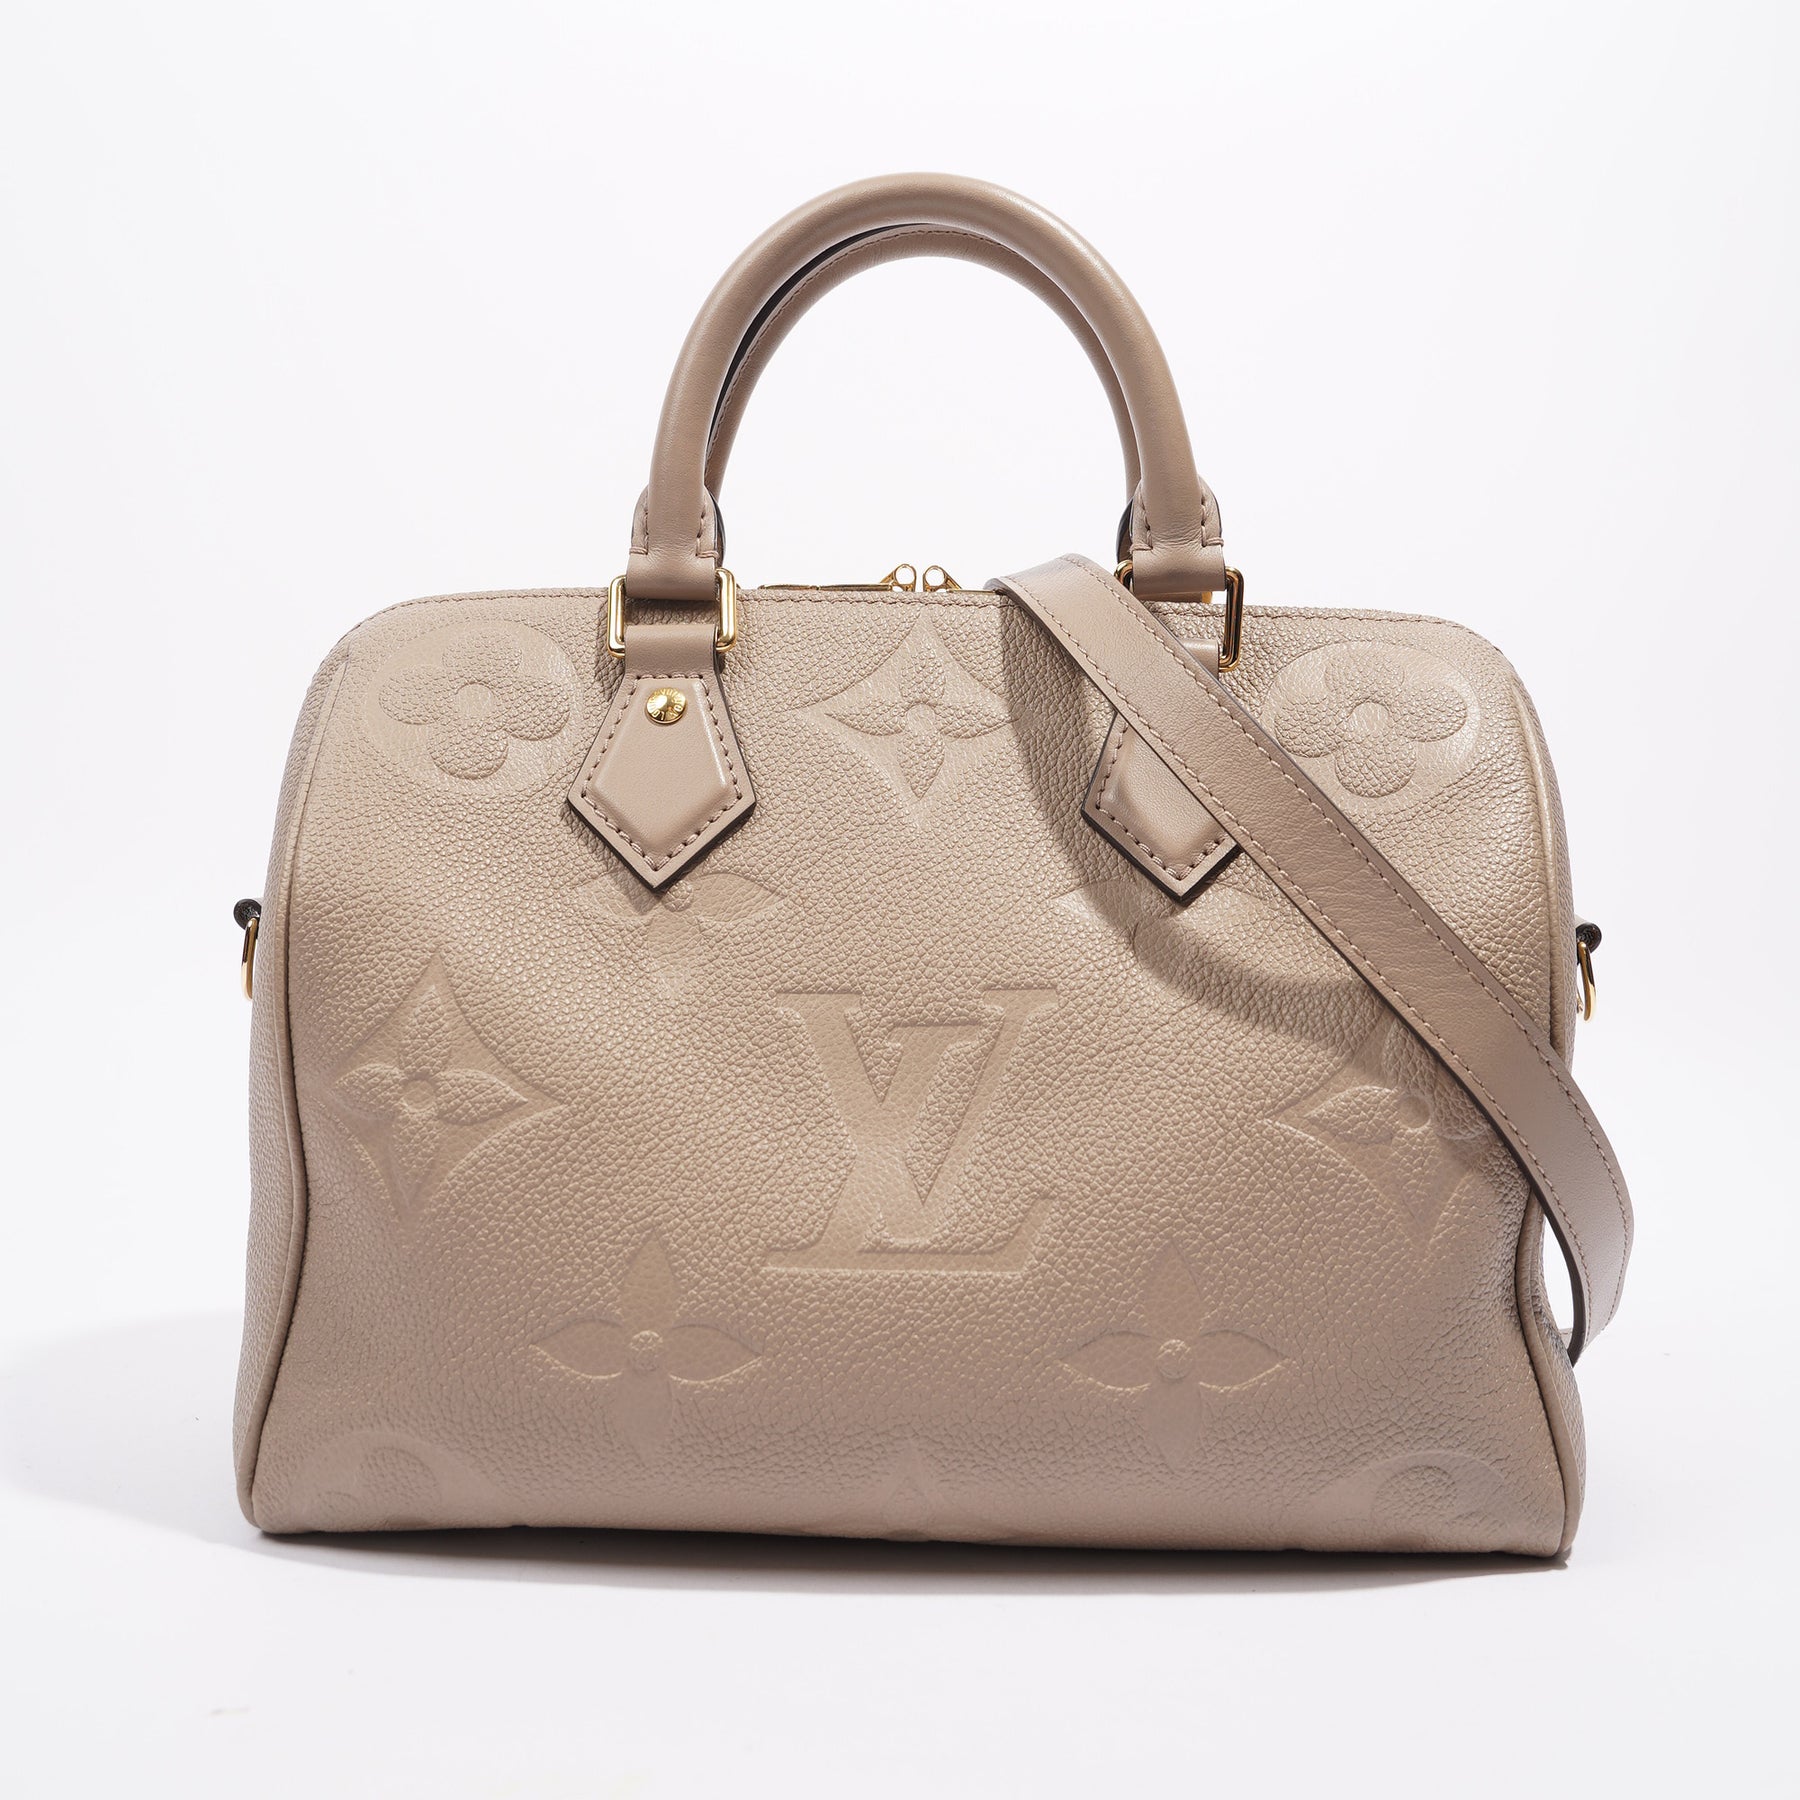 Louis Vuitton : LEATHER AND FABRIC BACKPACK “Ellipse”, Louis